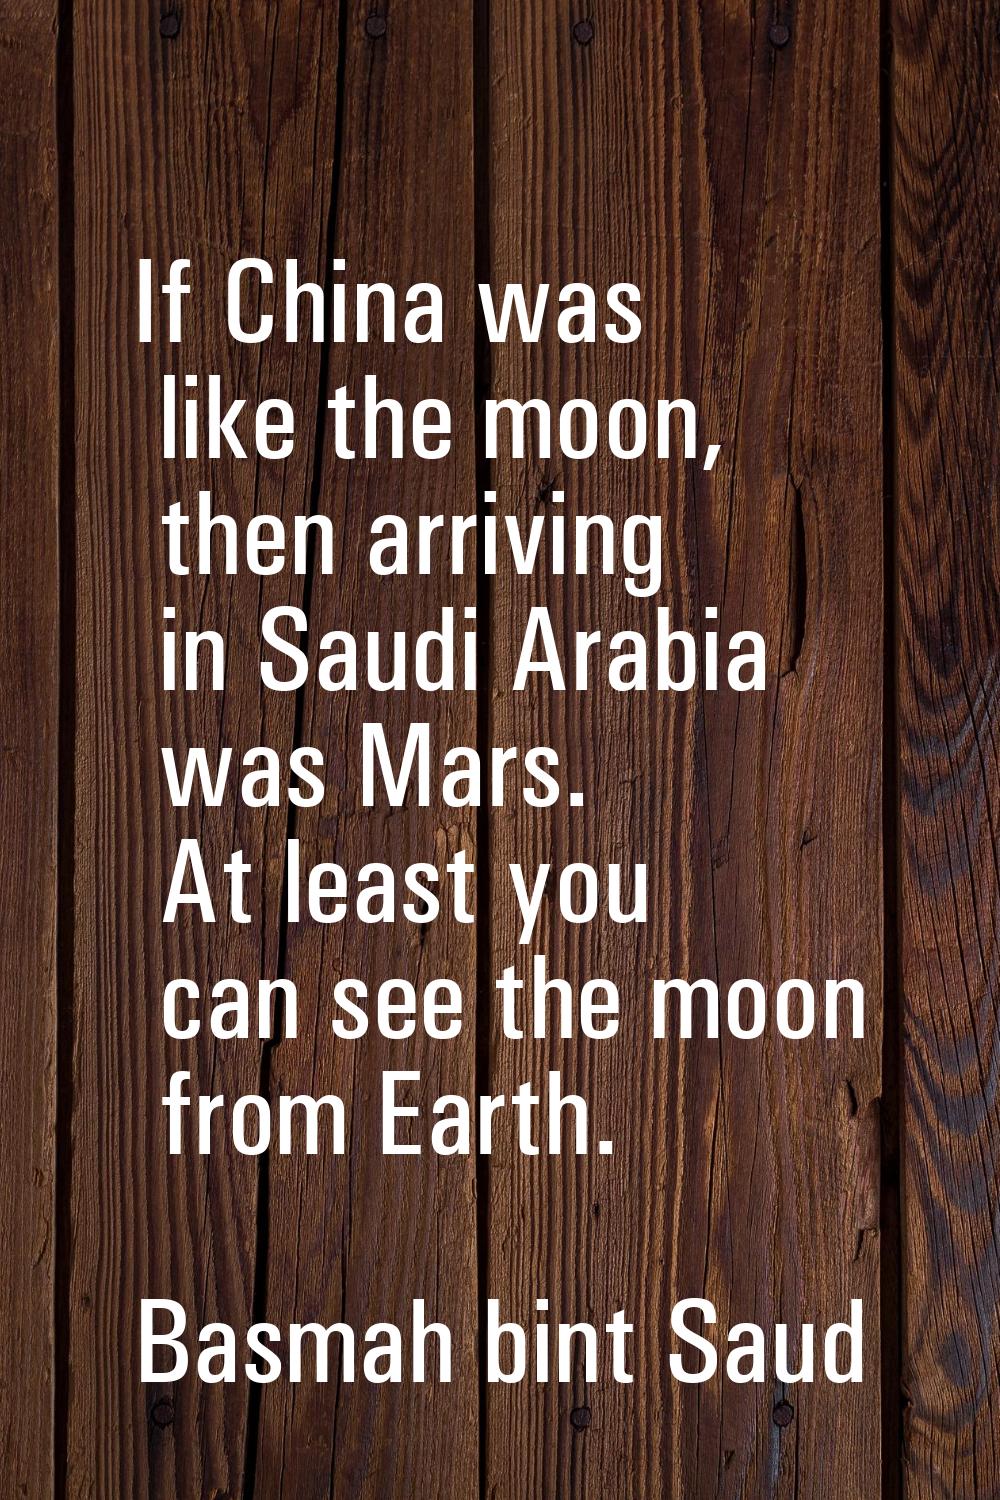 If China was like the moon, then arriving in Saudi Arabia was Mars. At least you can see the moon f